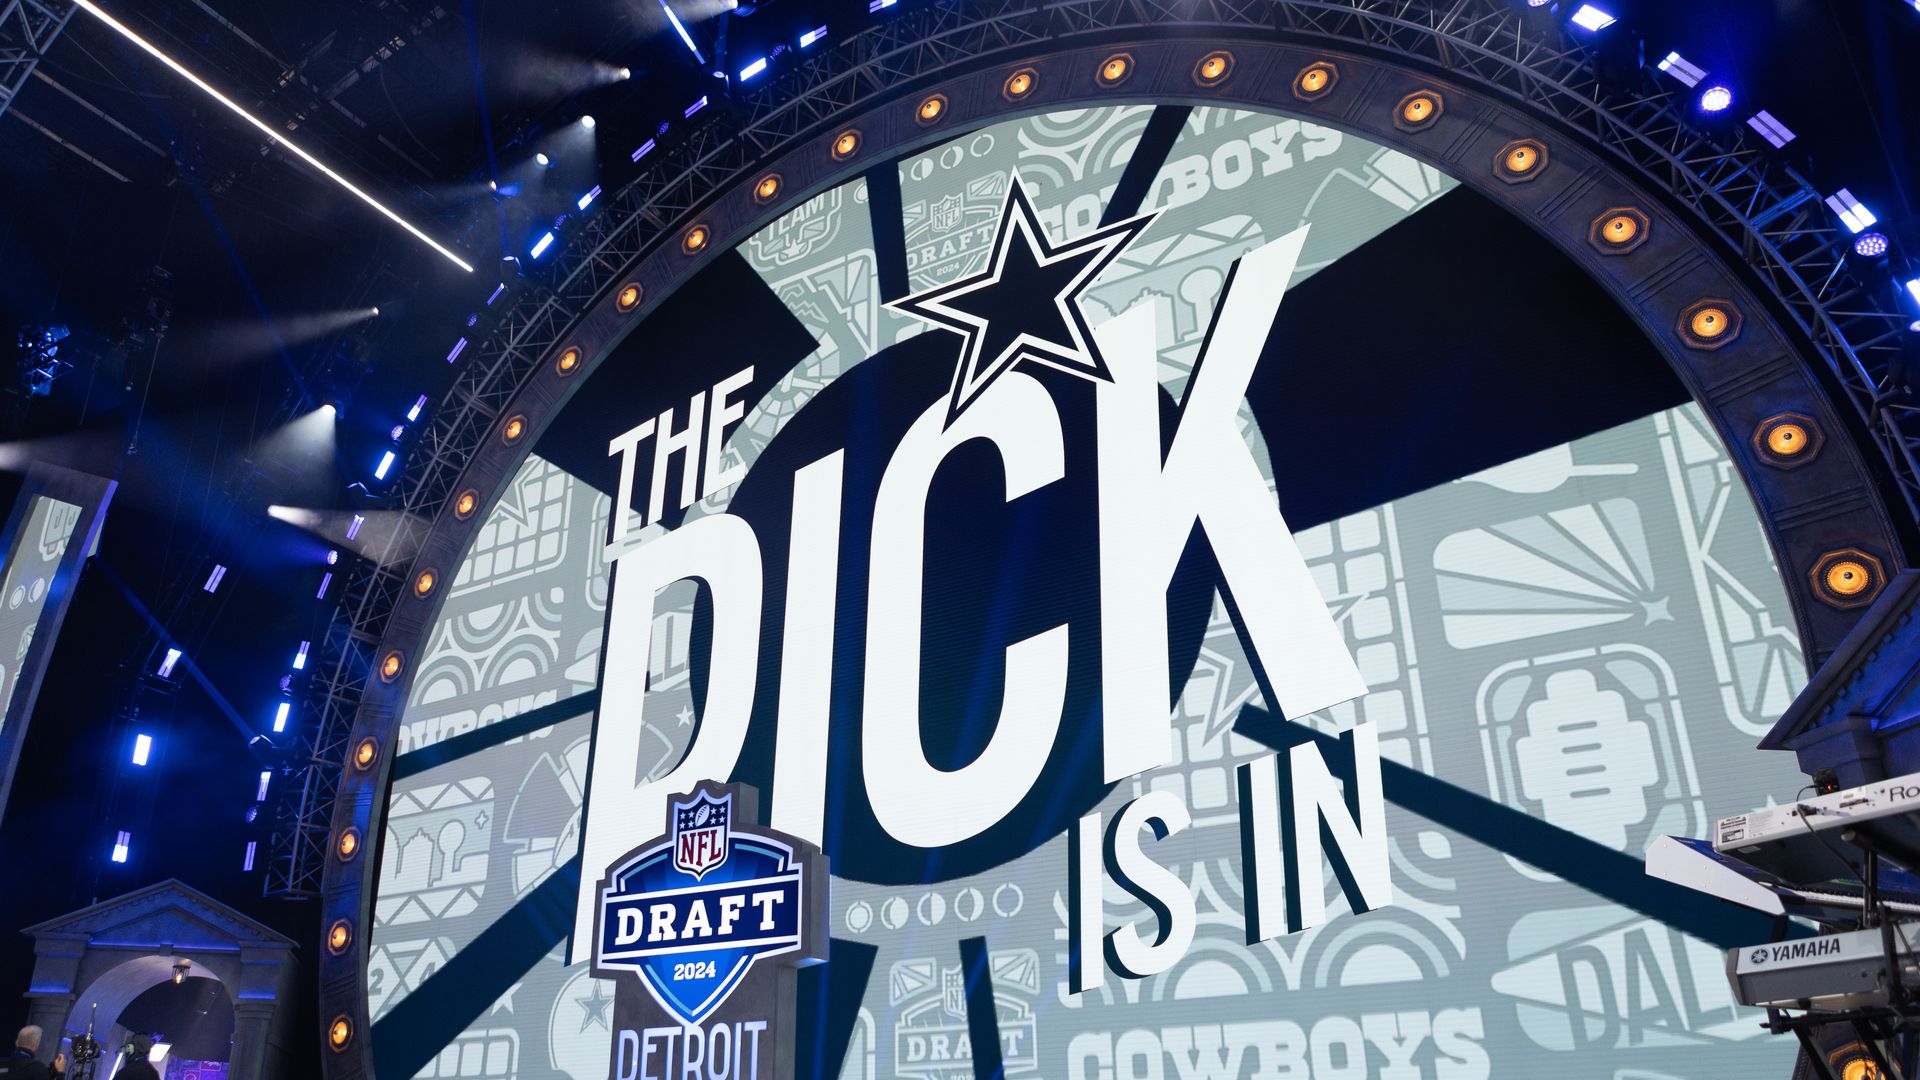 A photo from the Dallas Cowboys draft 